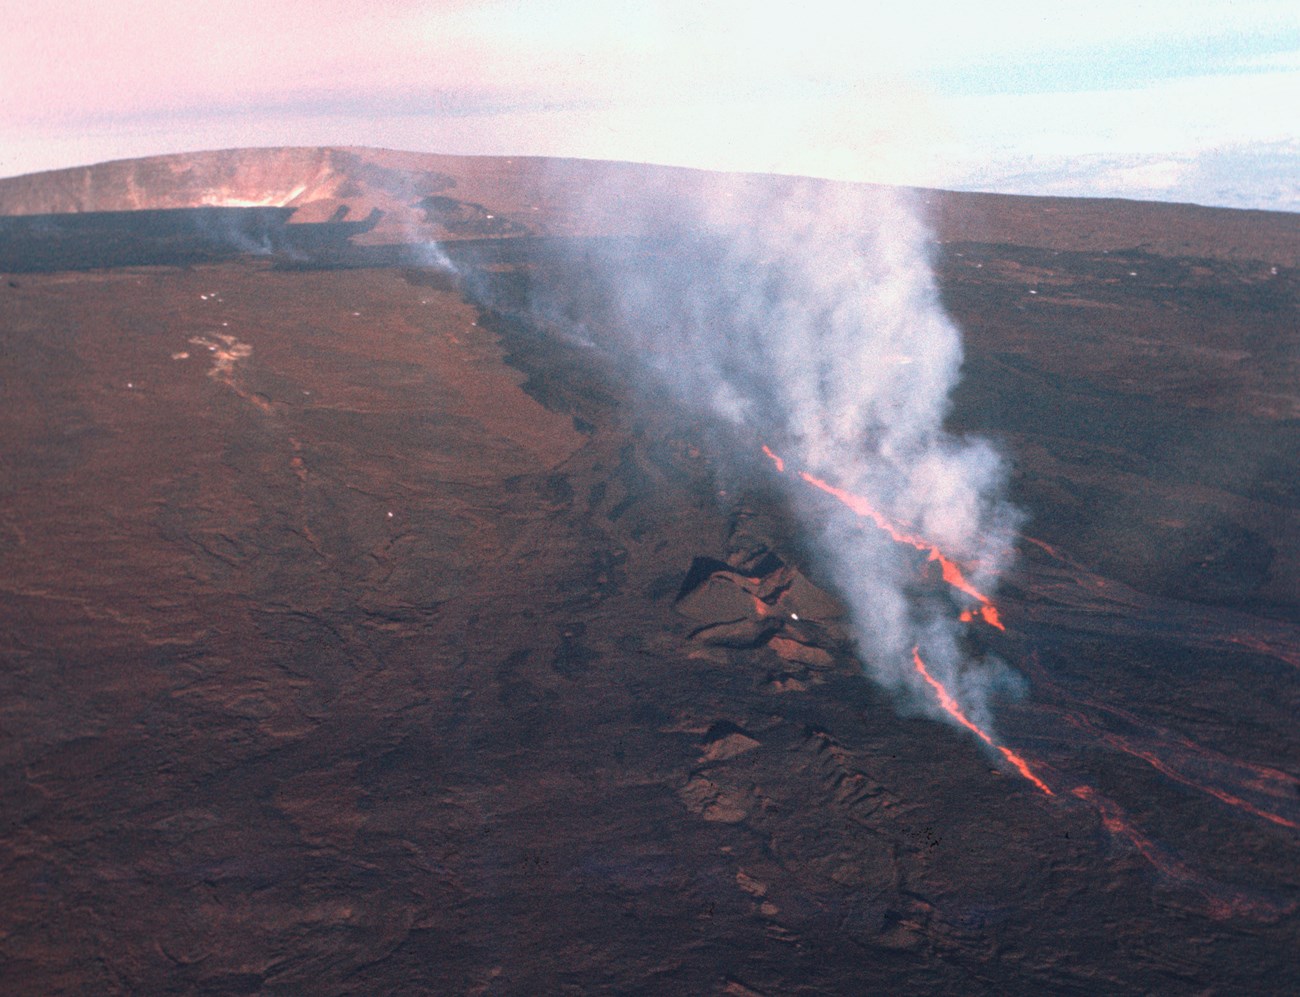 Aerial view of a volcanic fissure spewing lava with a large volcanic caldera in the background